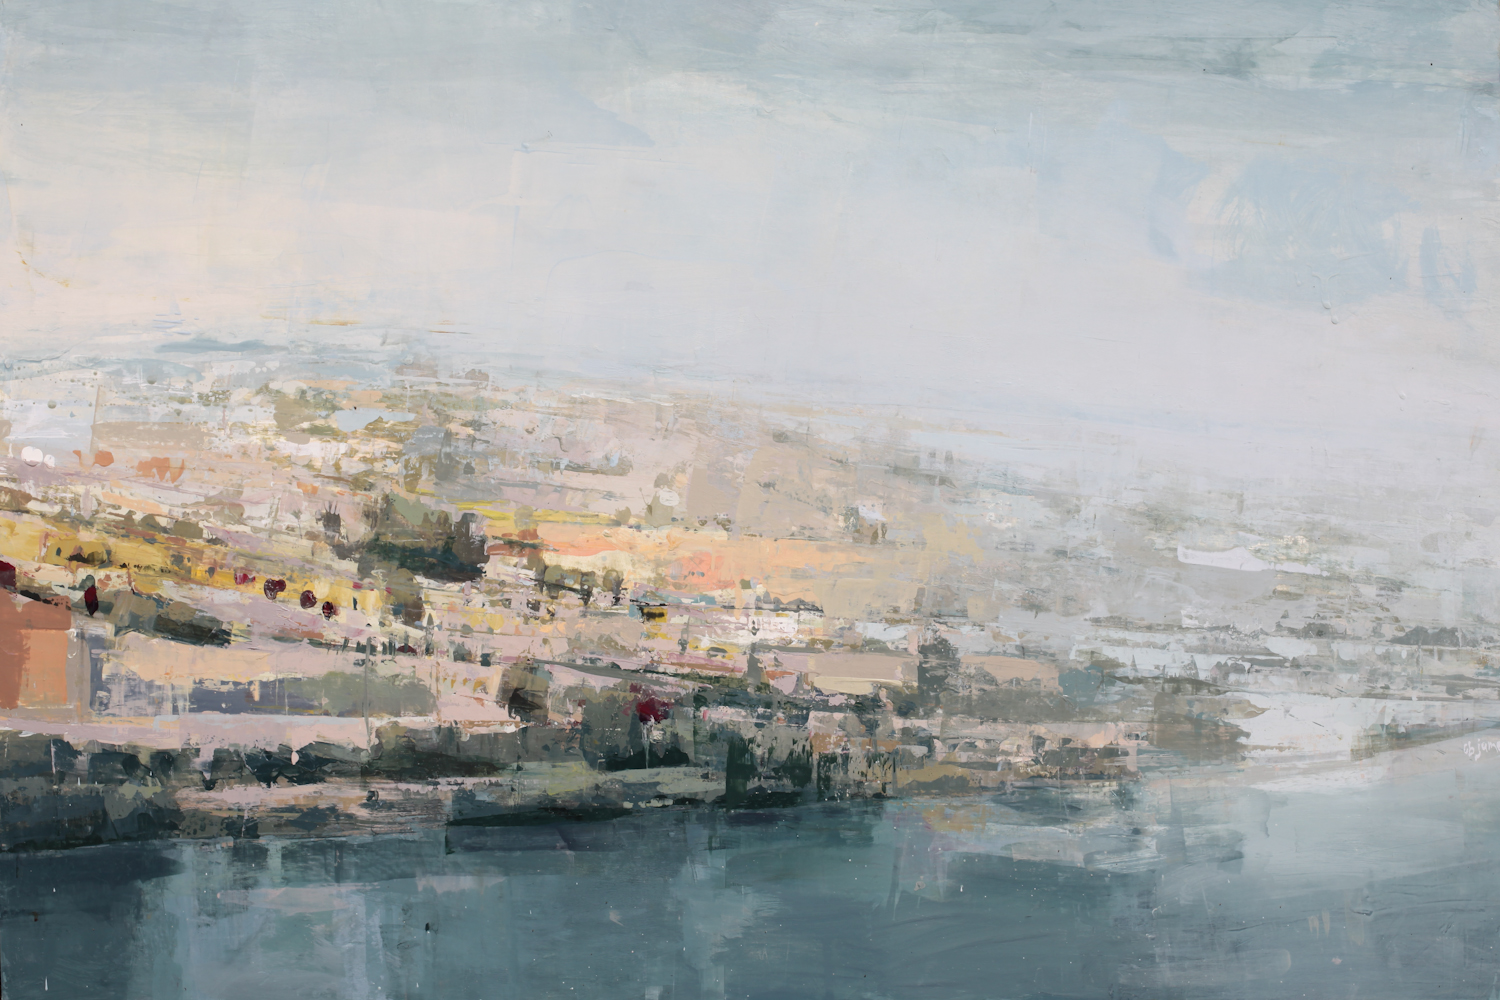 Impressionist landscape painting - Chelsea James, "North," 24 x 36 inches, Oil on panel